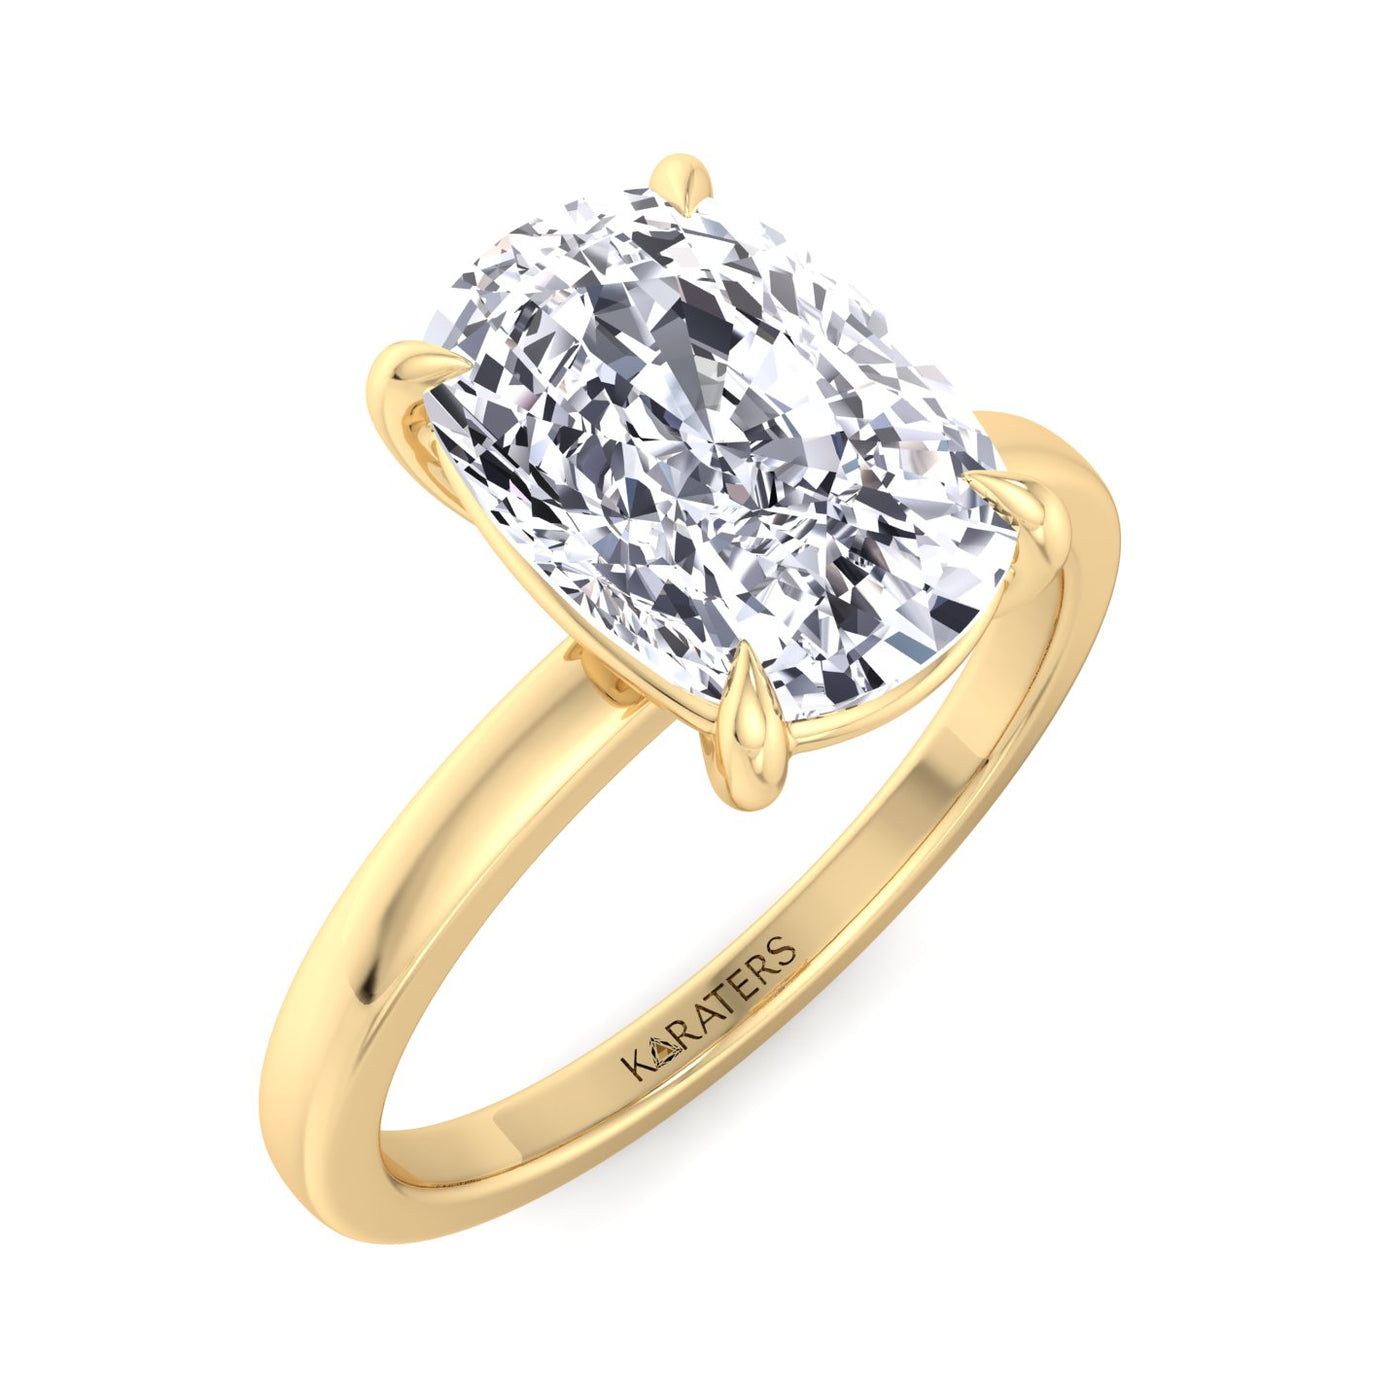 elongated-cushion-cut-solitaire-lab-grown-diamond-engagement-ring-in-solid-yellow-gold